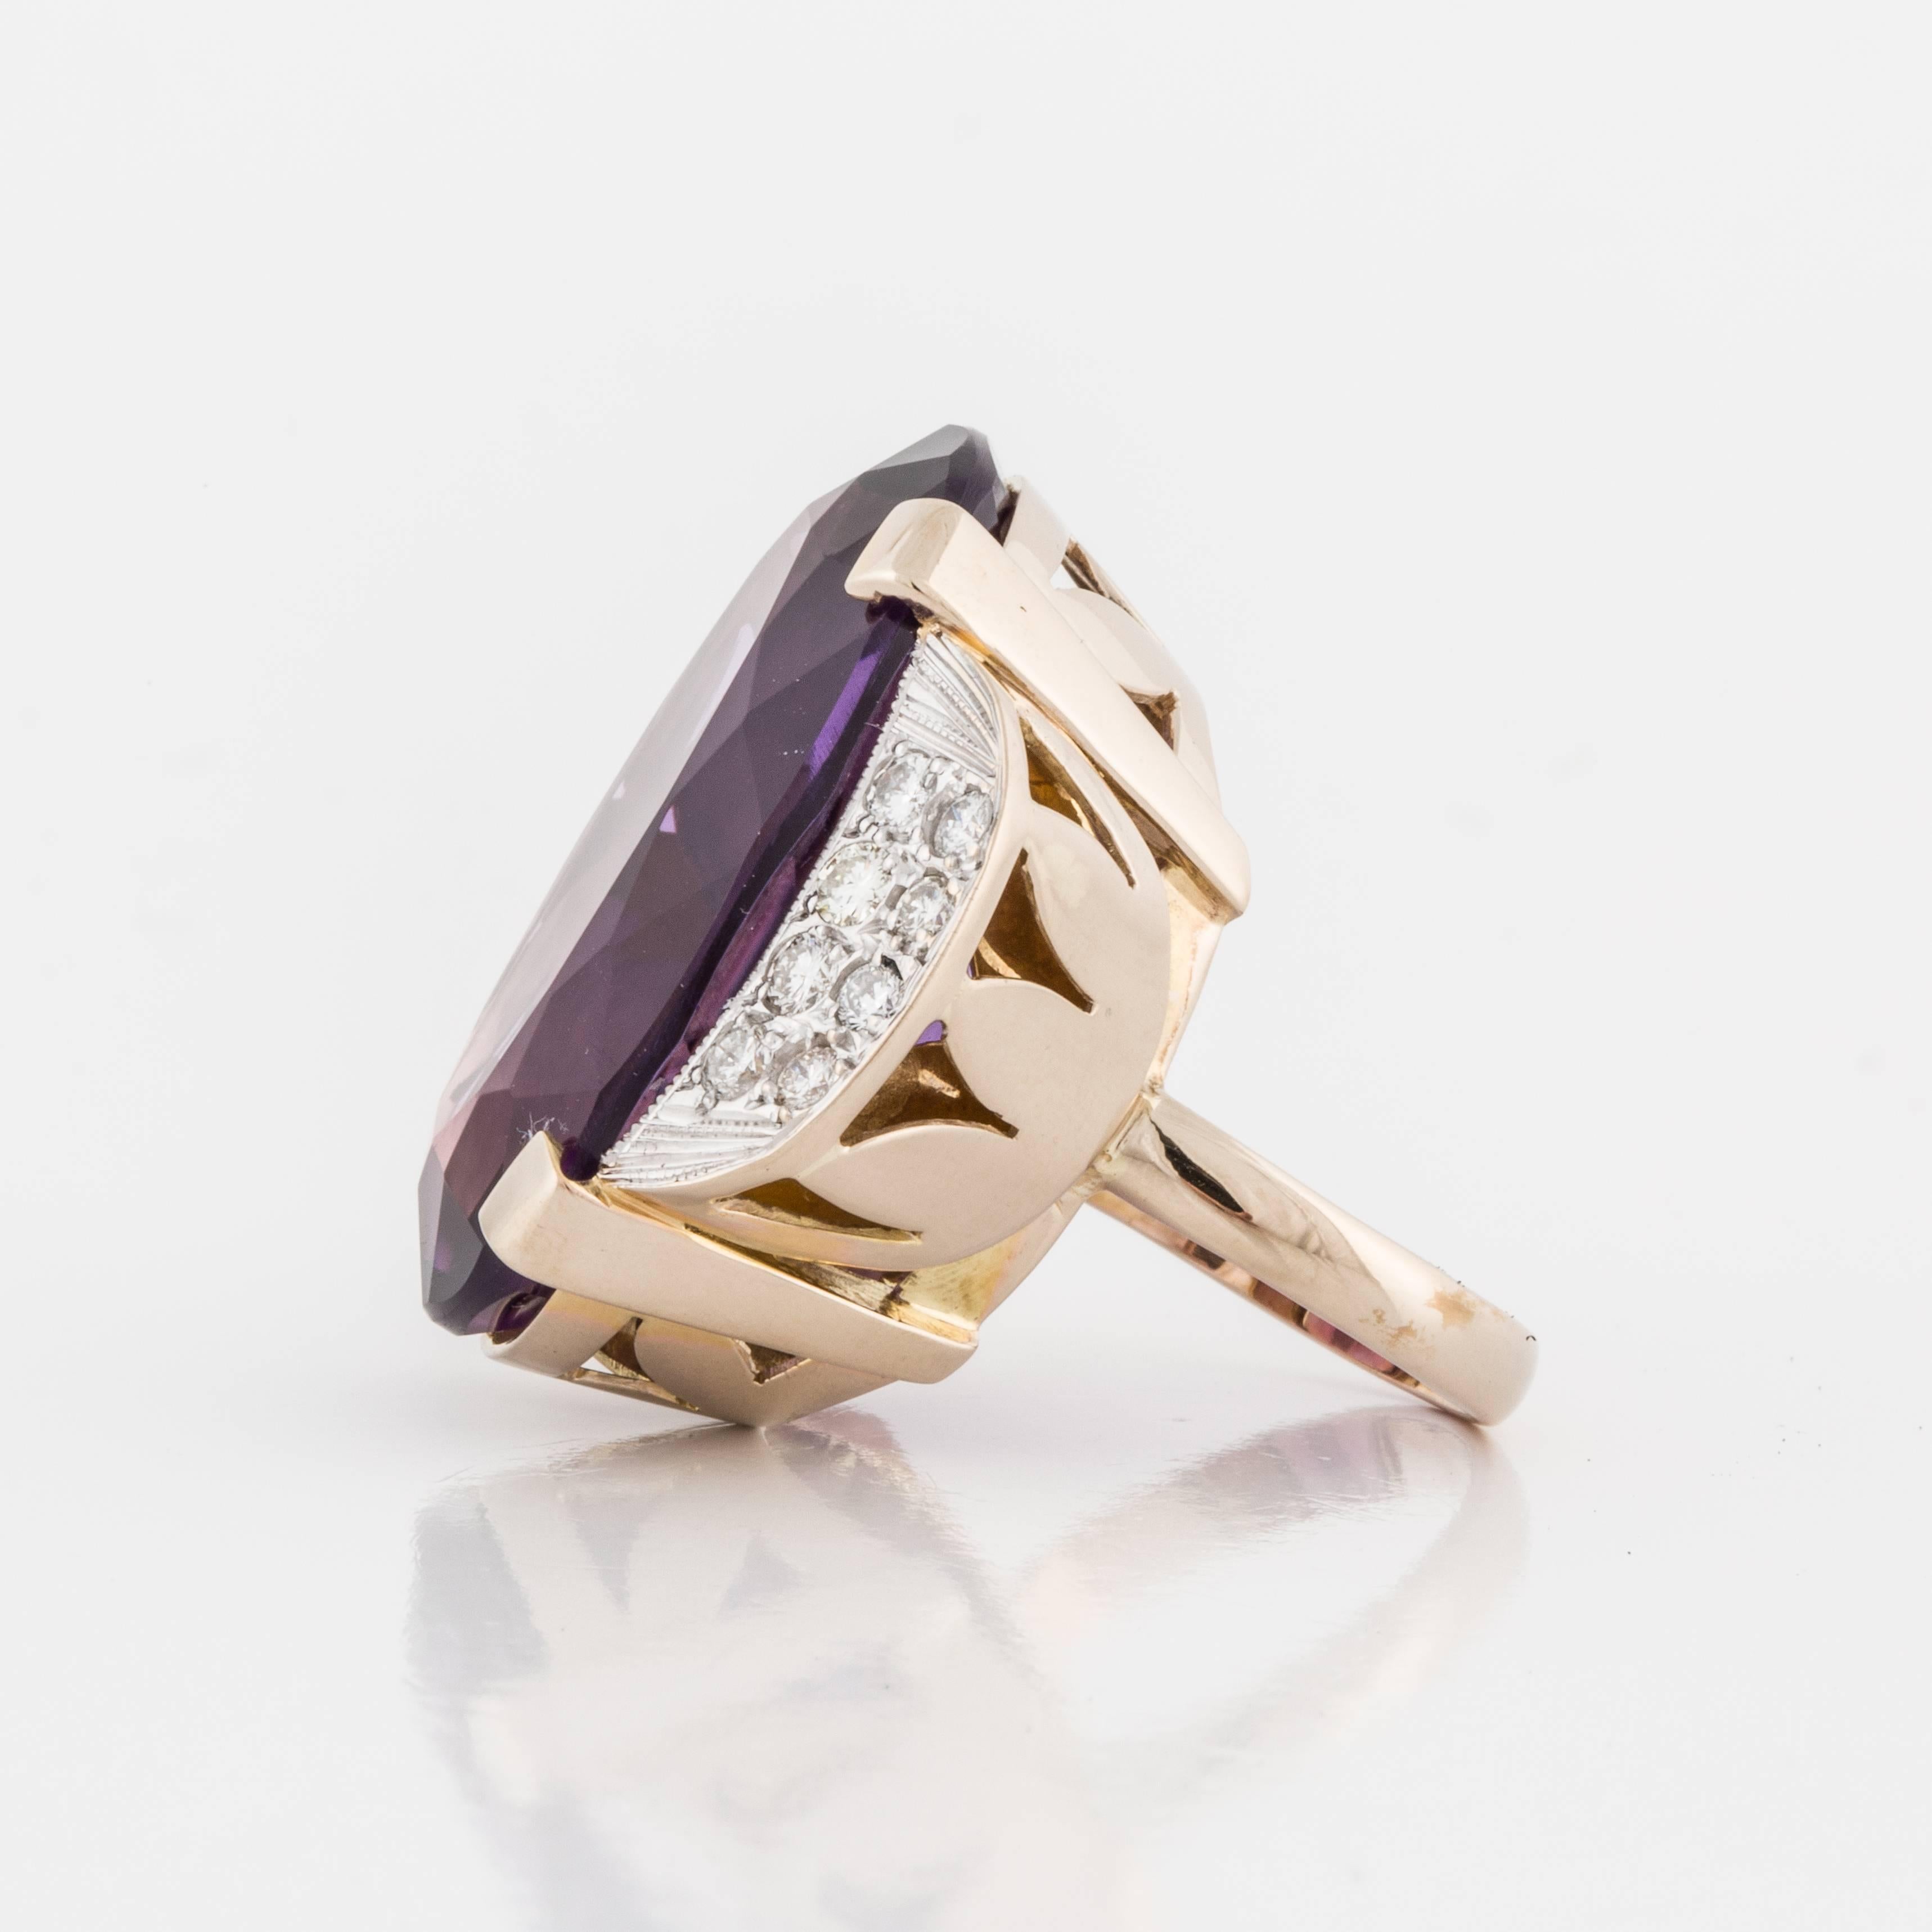 18K yellow gold ring featuring a large amethyst accented by round diamonds.  The oval amethyst measures 1 1/4 inches long by 7/8 inches wide.  There are 16 round diamonds that total 1 carat, G-I color and VS1-SI1 clarity.  Total presentation area